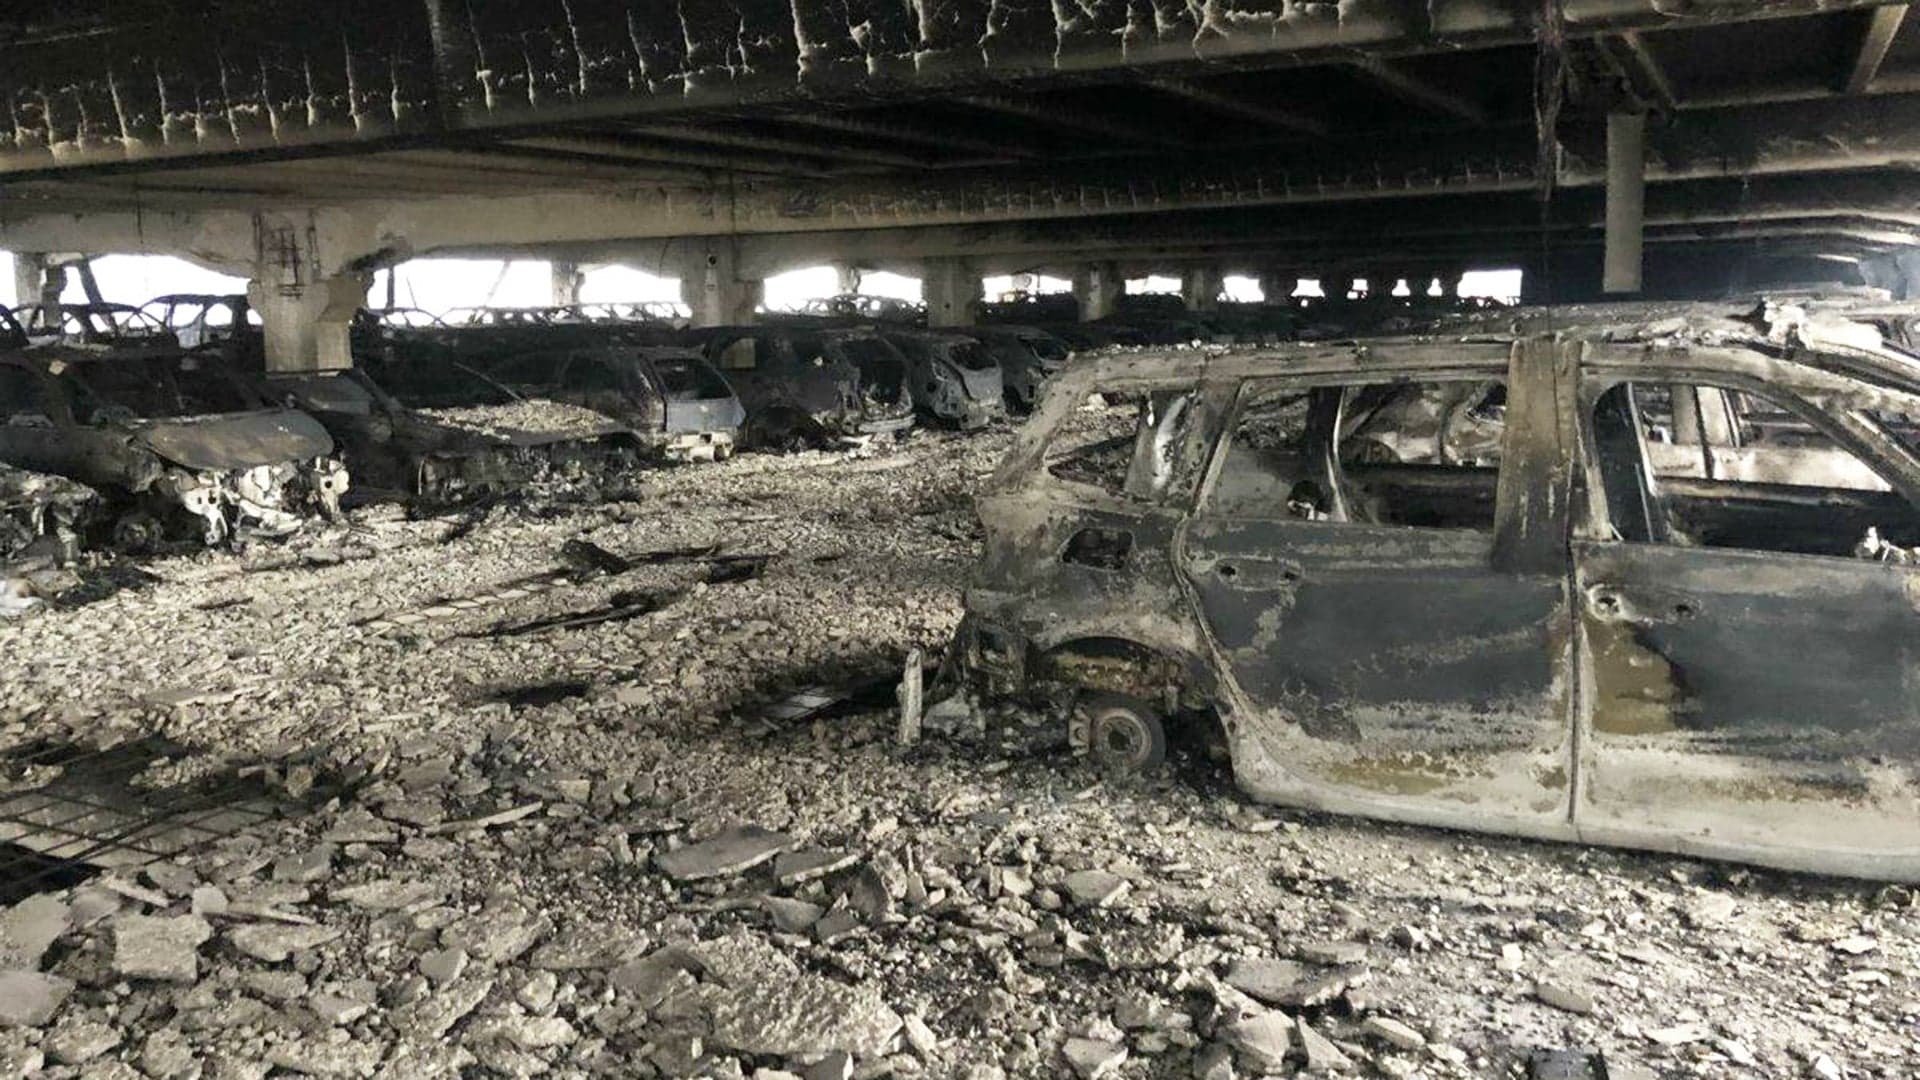 Massive New Year’s Eve Parking Garage Fire Destroys More Than 1,400 Cars in England